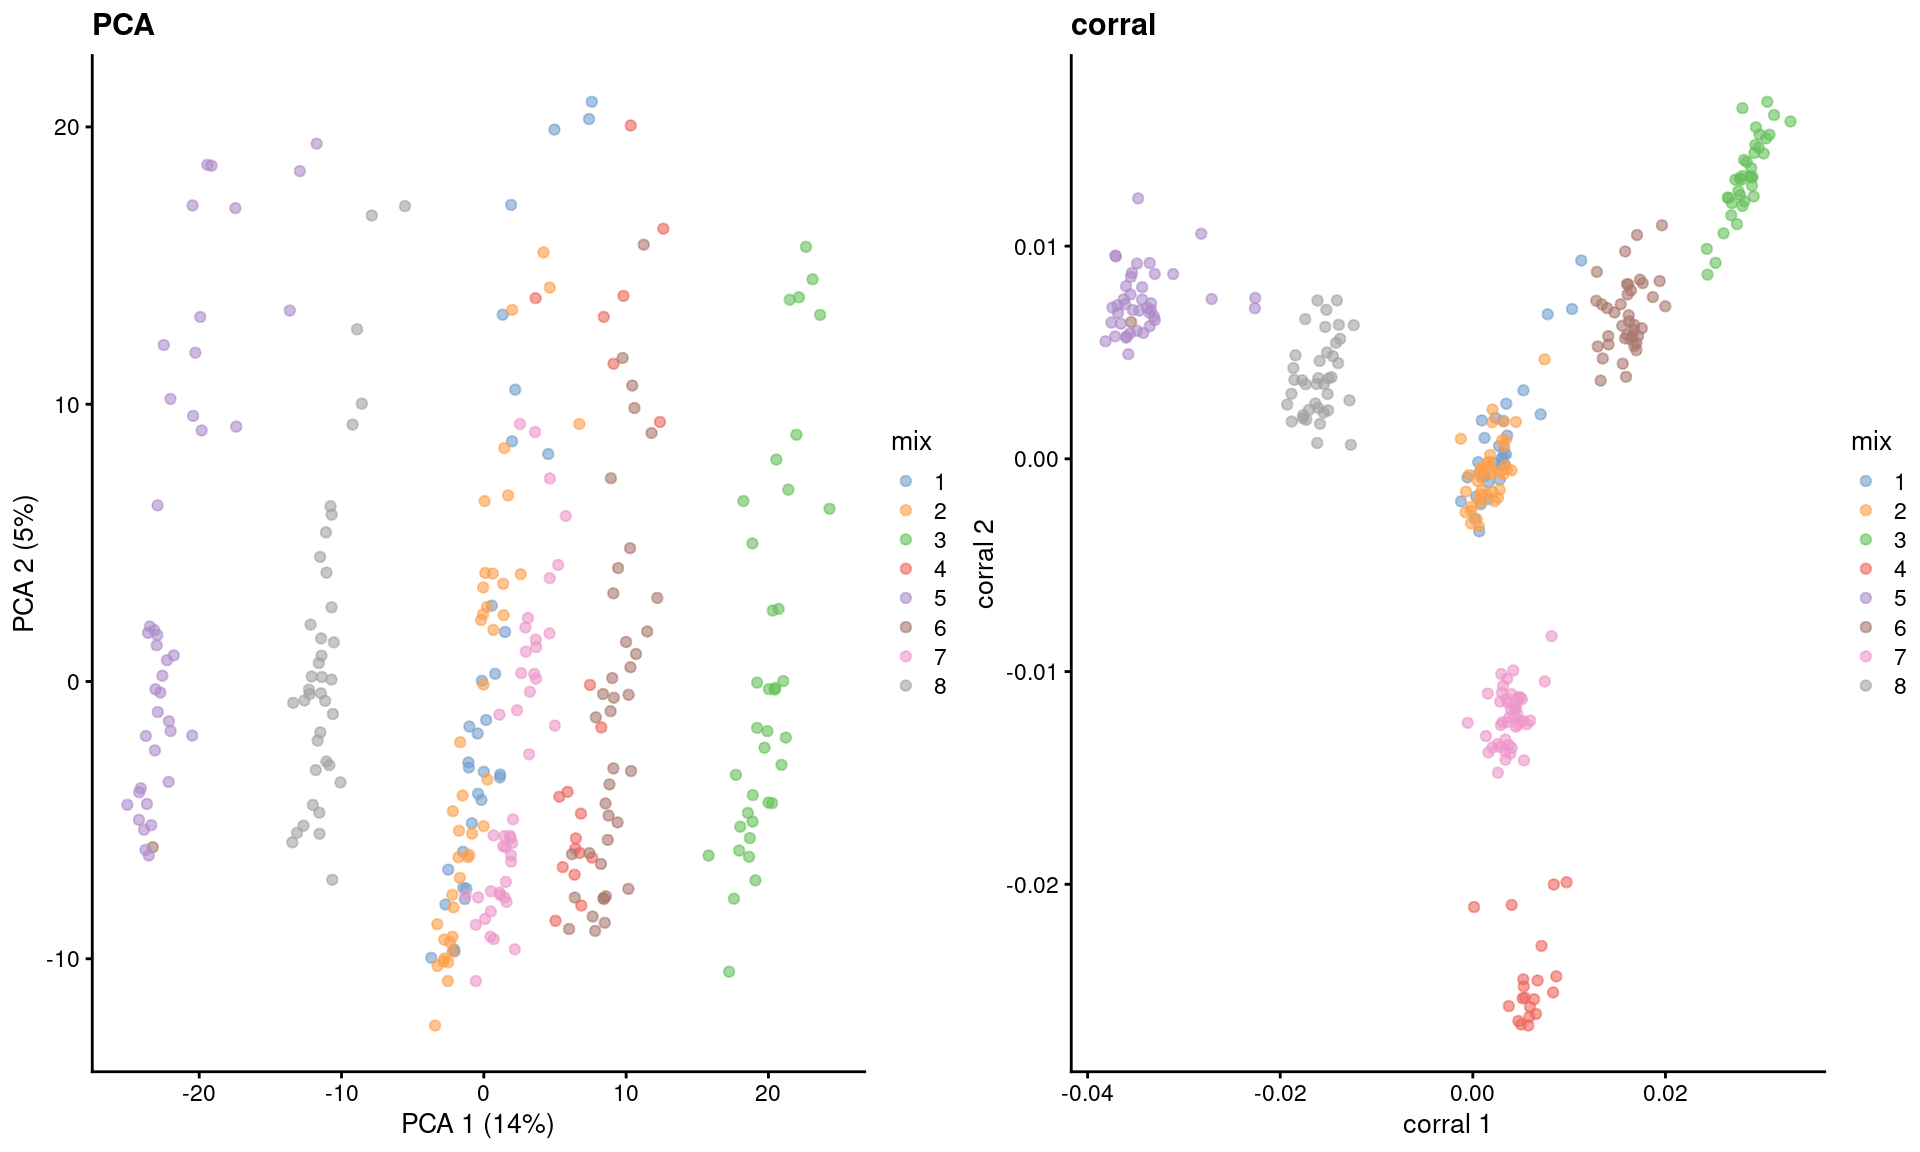 Dimensionality reduction results of all pool-and-split libraries in the SORT-seq CellBench data, computed by a PCA on the log-normalized expression values (left) or using the _corral_ package (right). Each point represents a library and is colored by the mixing ratio used to construct it.